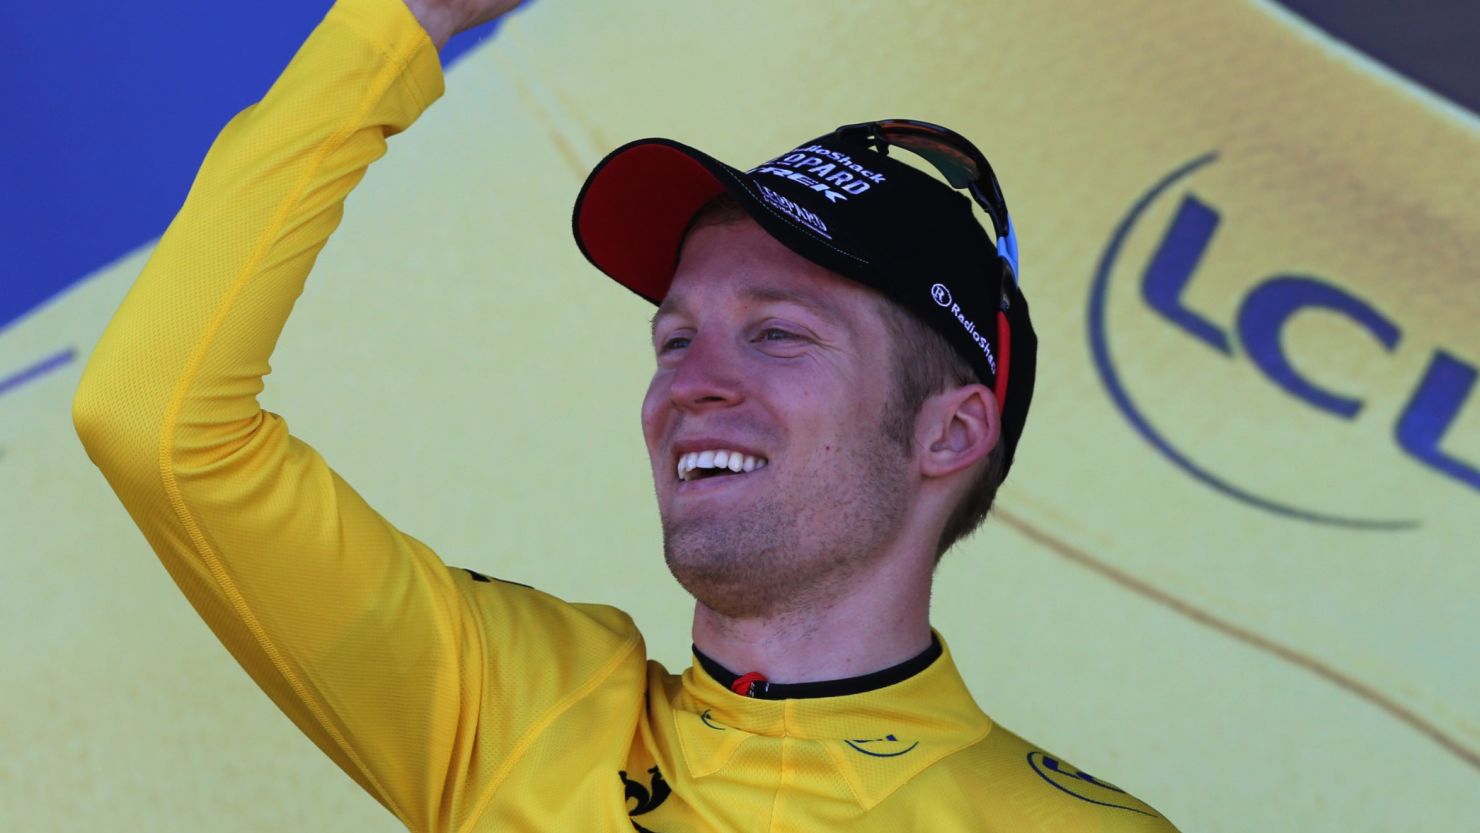 Jan Bakelants dons the yellow jersey after winning the second stage of the Tour de France in Ajaccio.